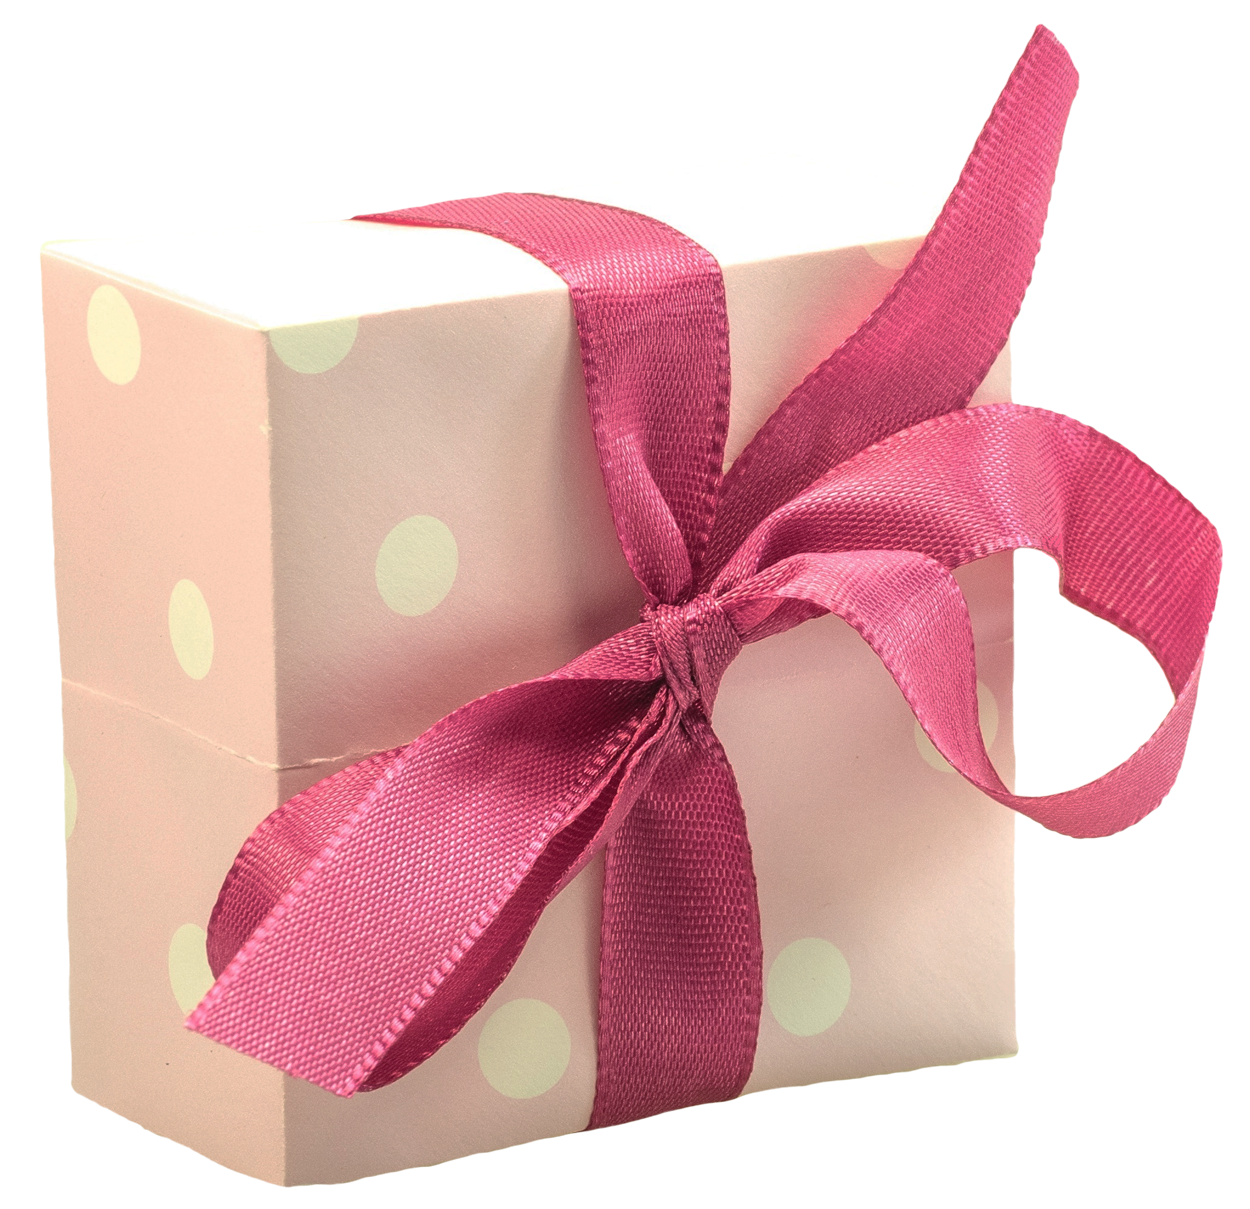 A Pink And White Polka Dot Box With A Pink Bow